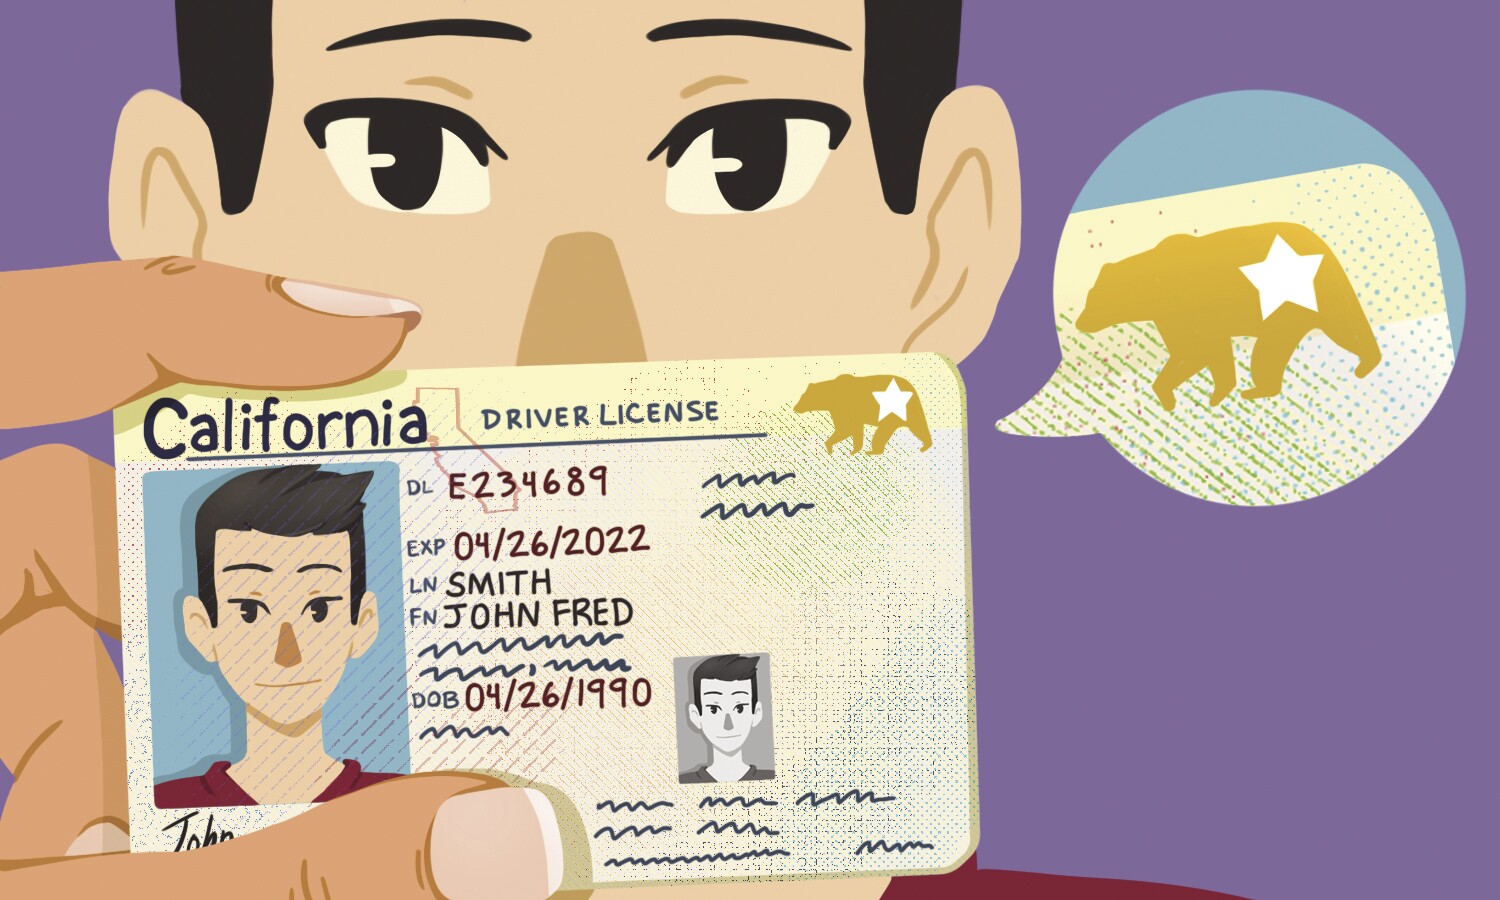 Californians, here's how to get your Real ID license without a DMV visit